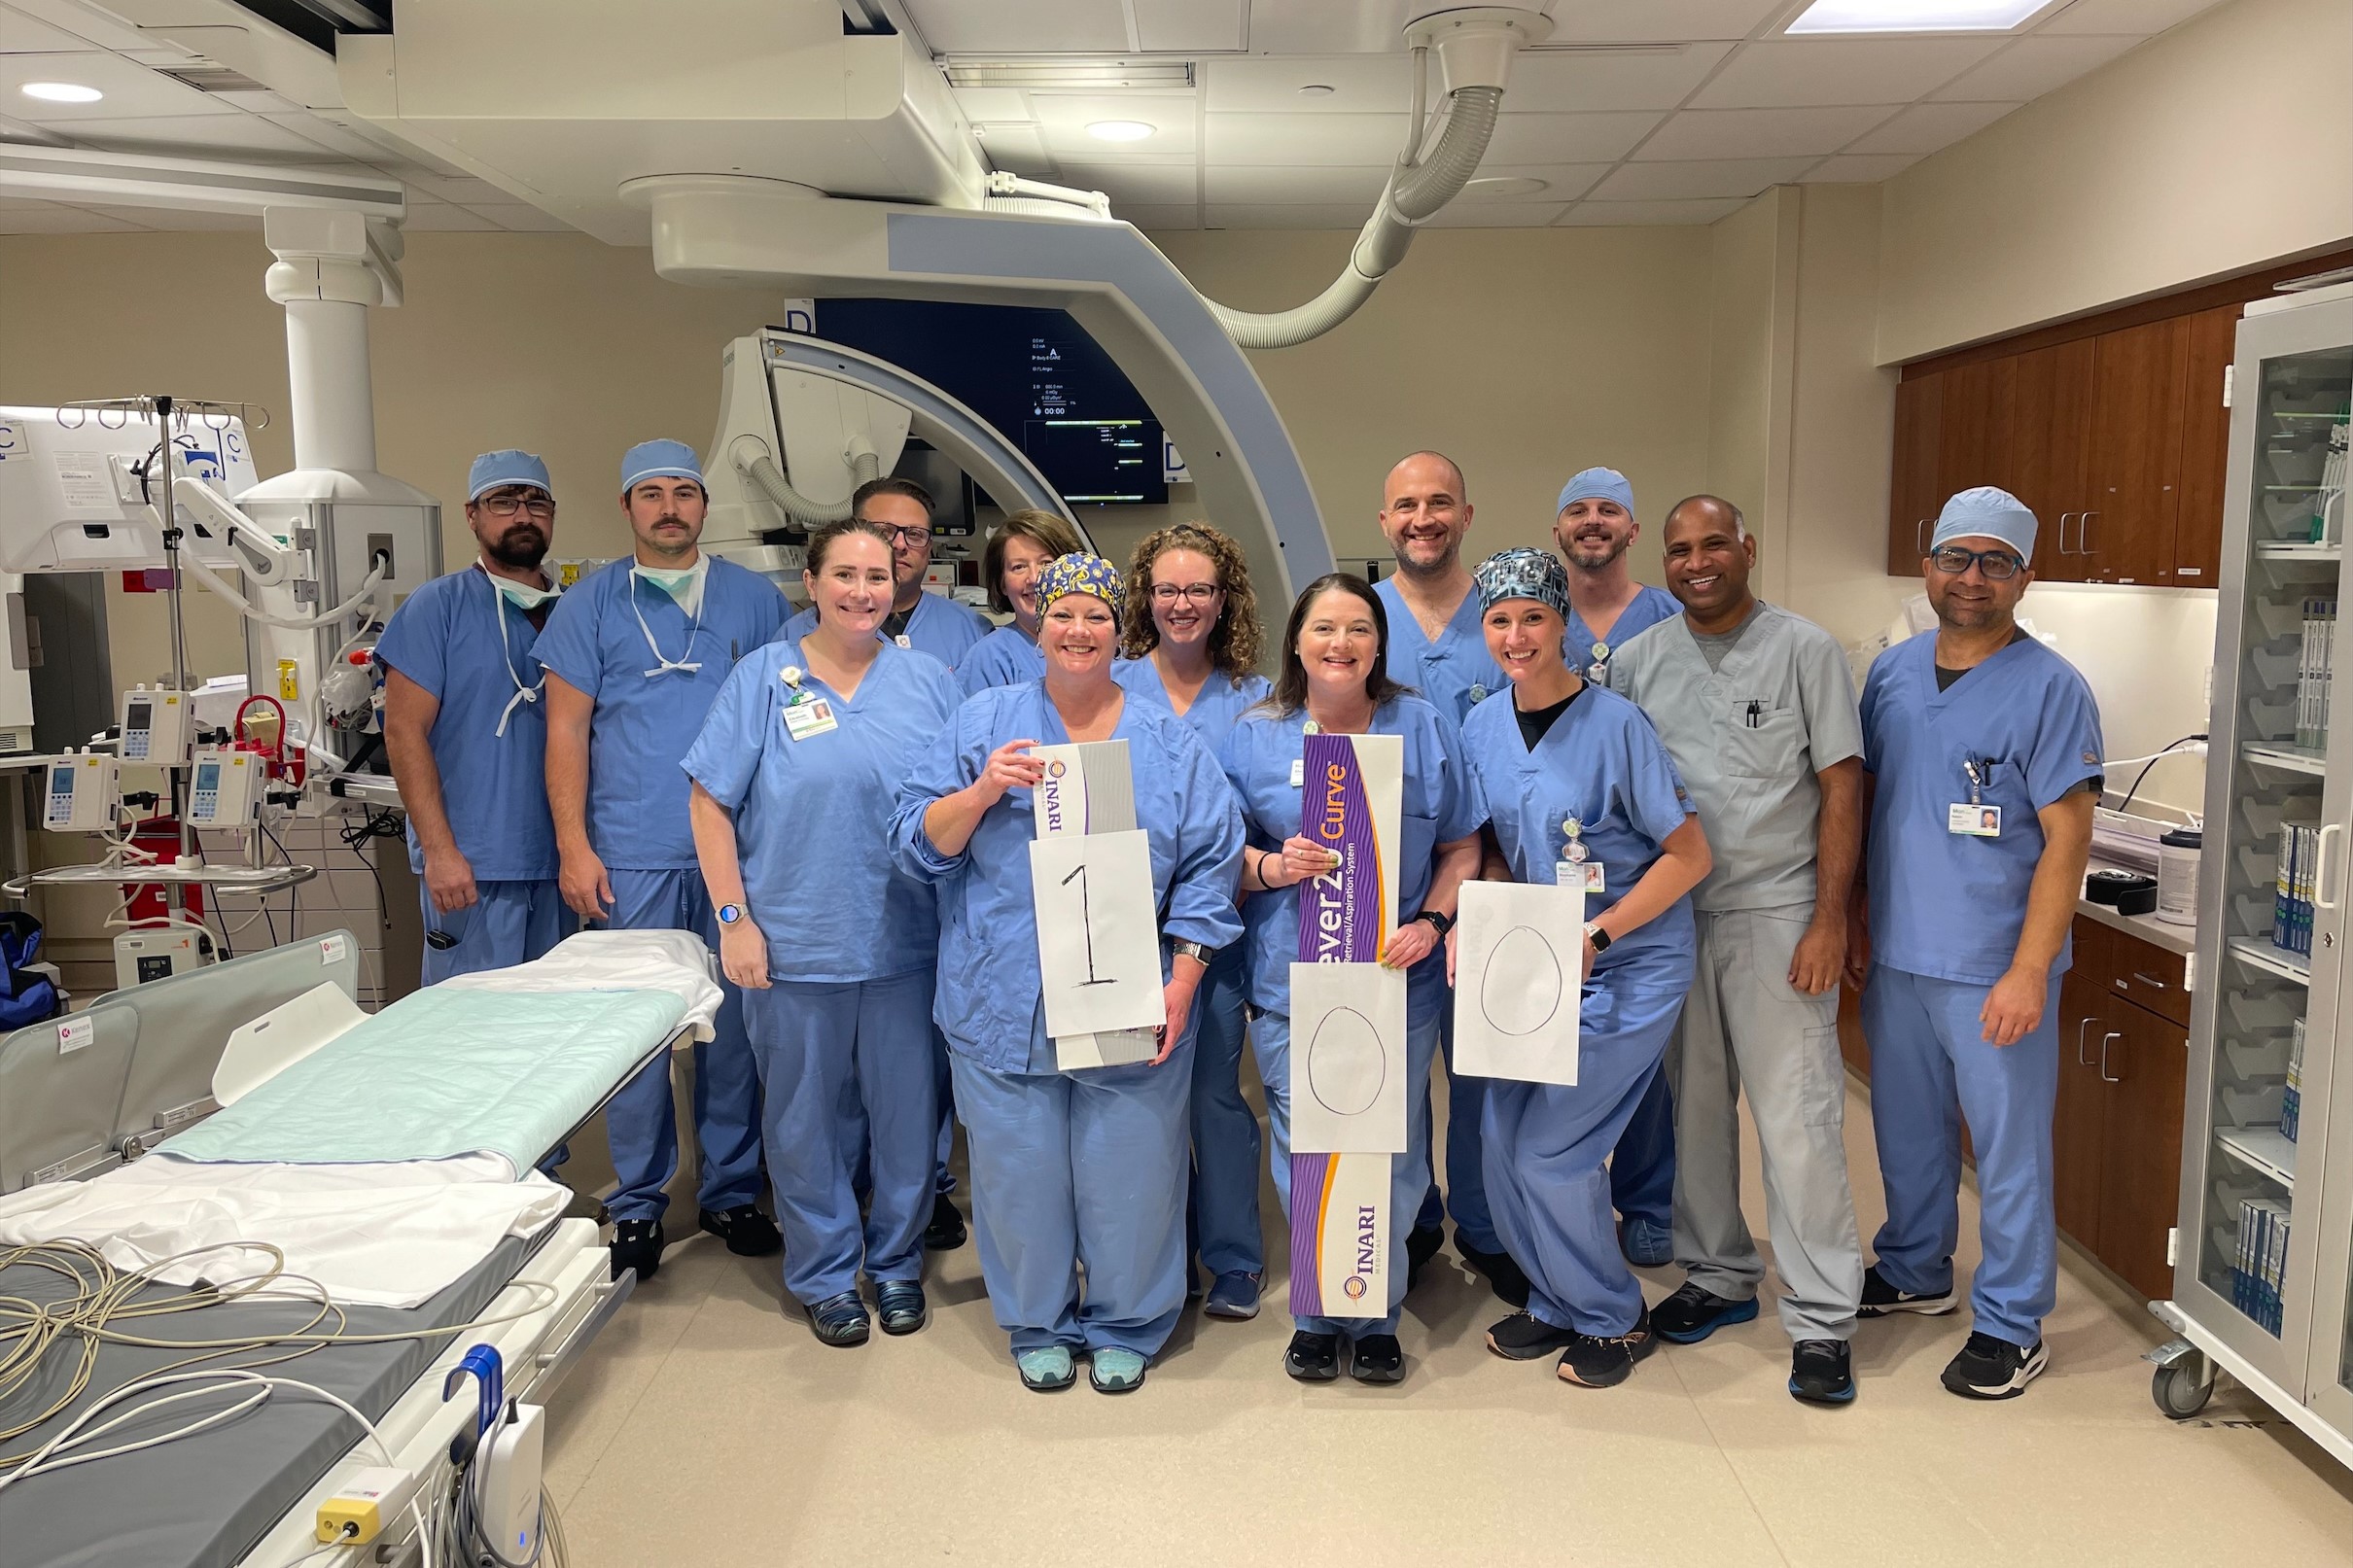 Mon Health Heart & Vascular Performs 100th Thrombectomy with the Inari  FlowTriever Device, Newsroom